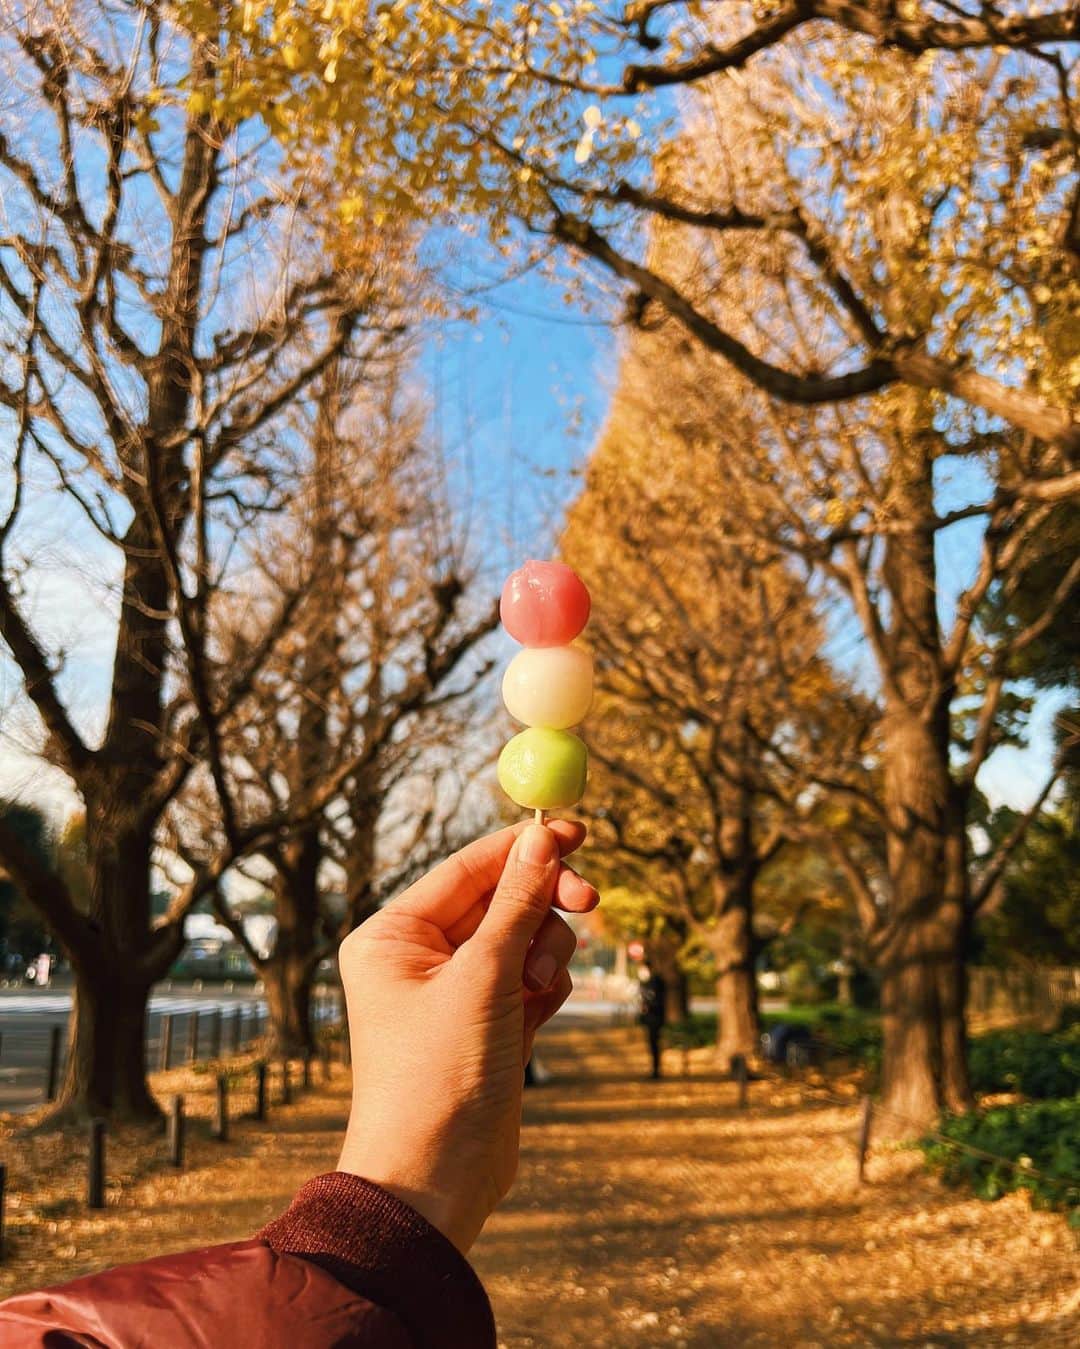 Girleatworldのインスタグラム：「Can you believe it? My first #girleatworld shot in two years! 🤗🍡  I haven't been able to travel outside of Singapore since late 2019 thanks to the pandemic. So when Singapore finally loosened up its border restrictions, we wasted no time booking our flight to Tokyo to be reunited with our family.  After serving quarantine, I went to the famous Gingko avenue at Meiji Jingu park in hopes to take photos of the yellowing gingko trees, which are planted allll over the sidewalks of major roads in Tokyo, only to find out I was a few days late 🥺 most of the leaves in this area had fallen off. Apparently, when a gingko tree sheds its leaves, they fall simultaneously all at once. I did notice a few gingko trees around my area that was lush has turned bare almost overnight. However, I also noticed other trees that are still lush while the others next to it are bare. I guess the leaves would still fall at different rates per trees! 🍂  #shotoniphone #iphone13promax #gingko #gingkotree #銀杏 #tokyo #🍡 #🍂」